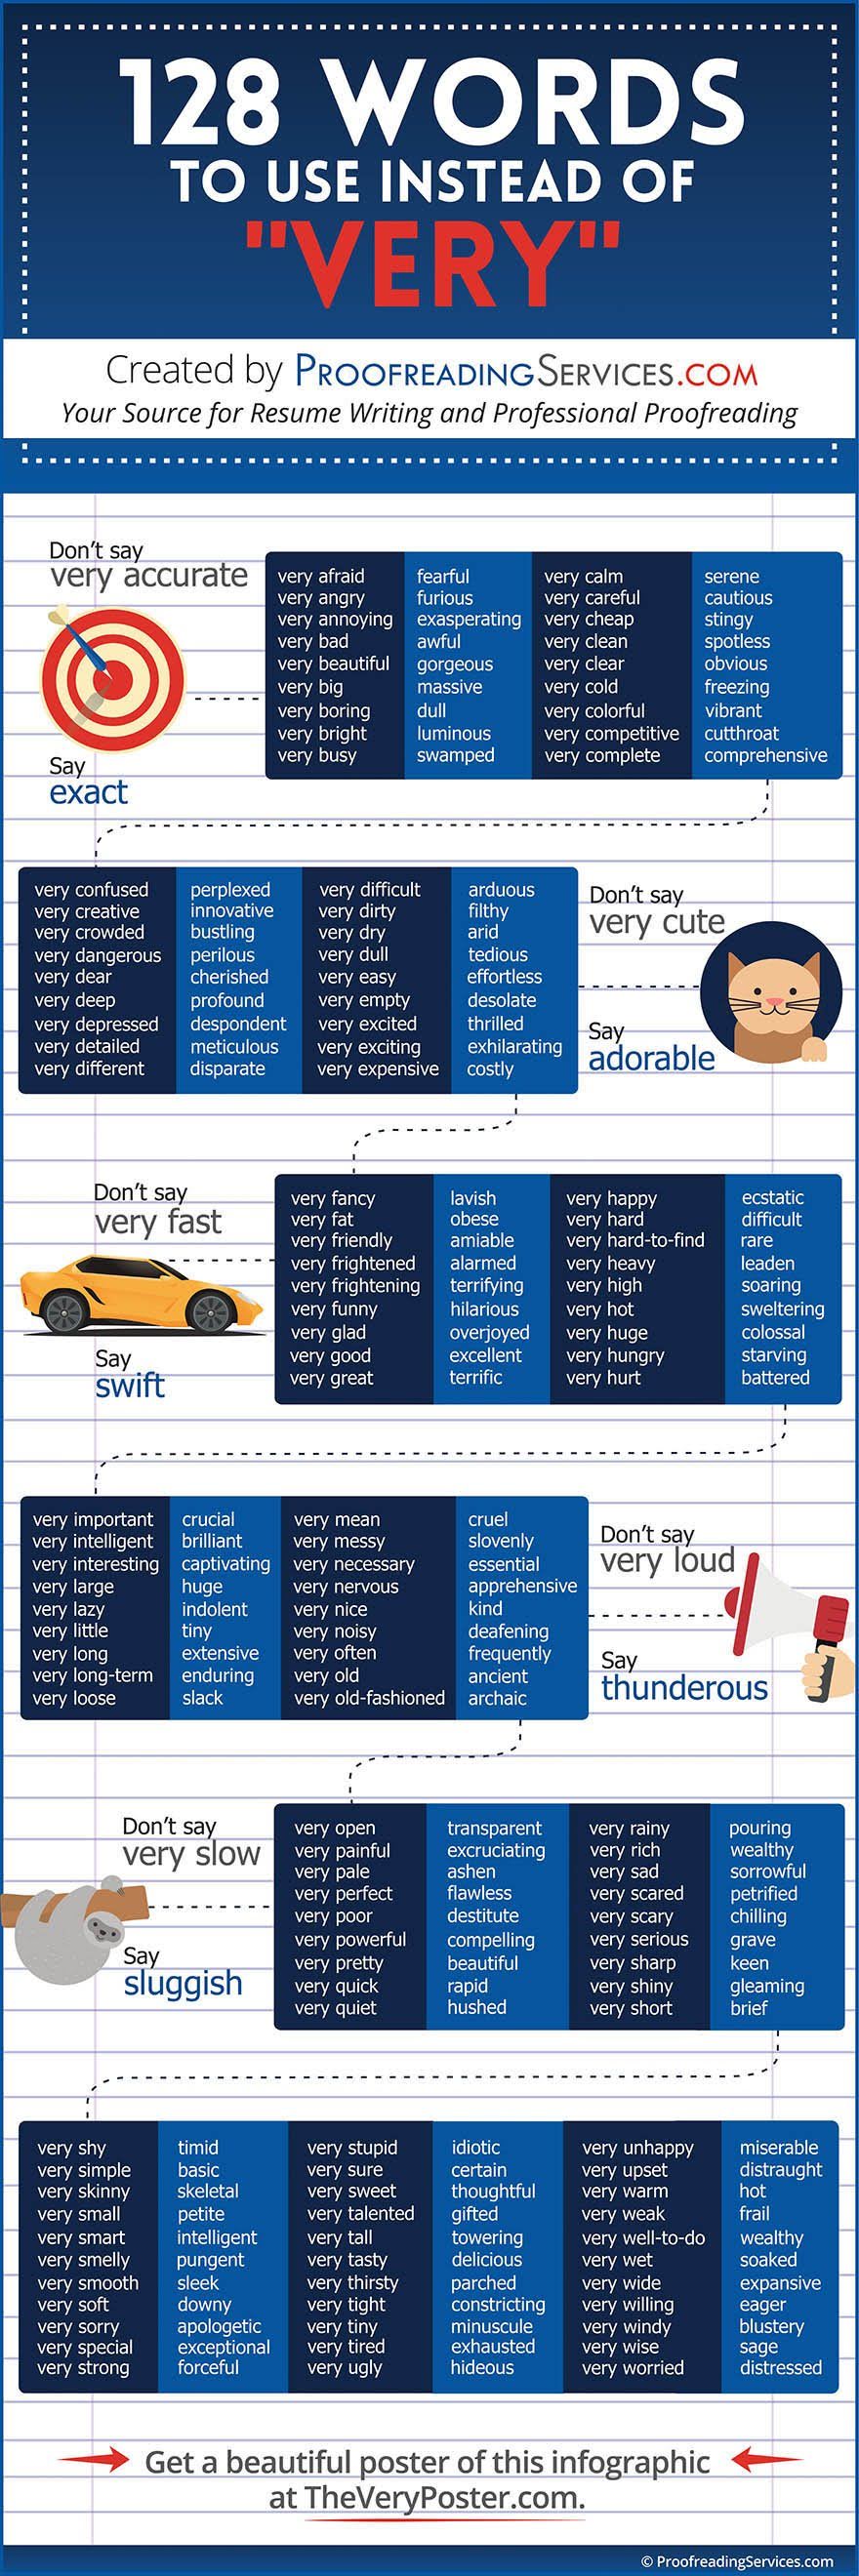 128 Words to Use Instead of "Very" #infographic